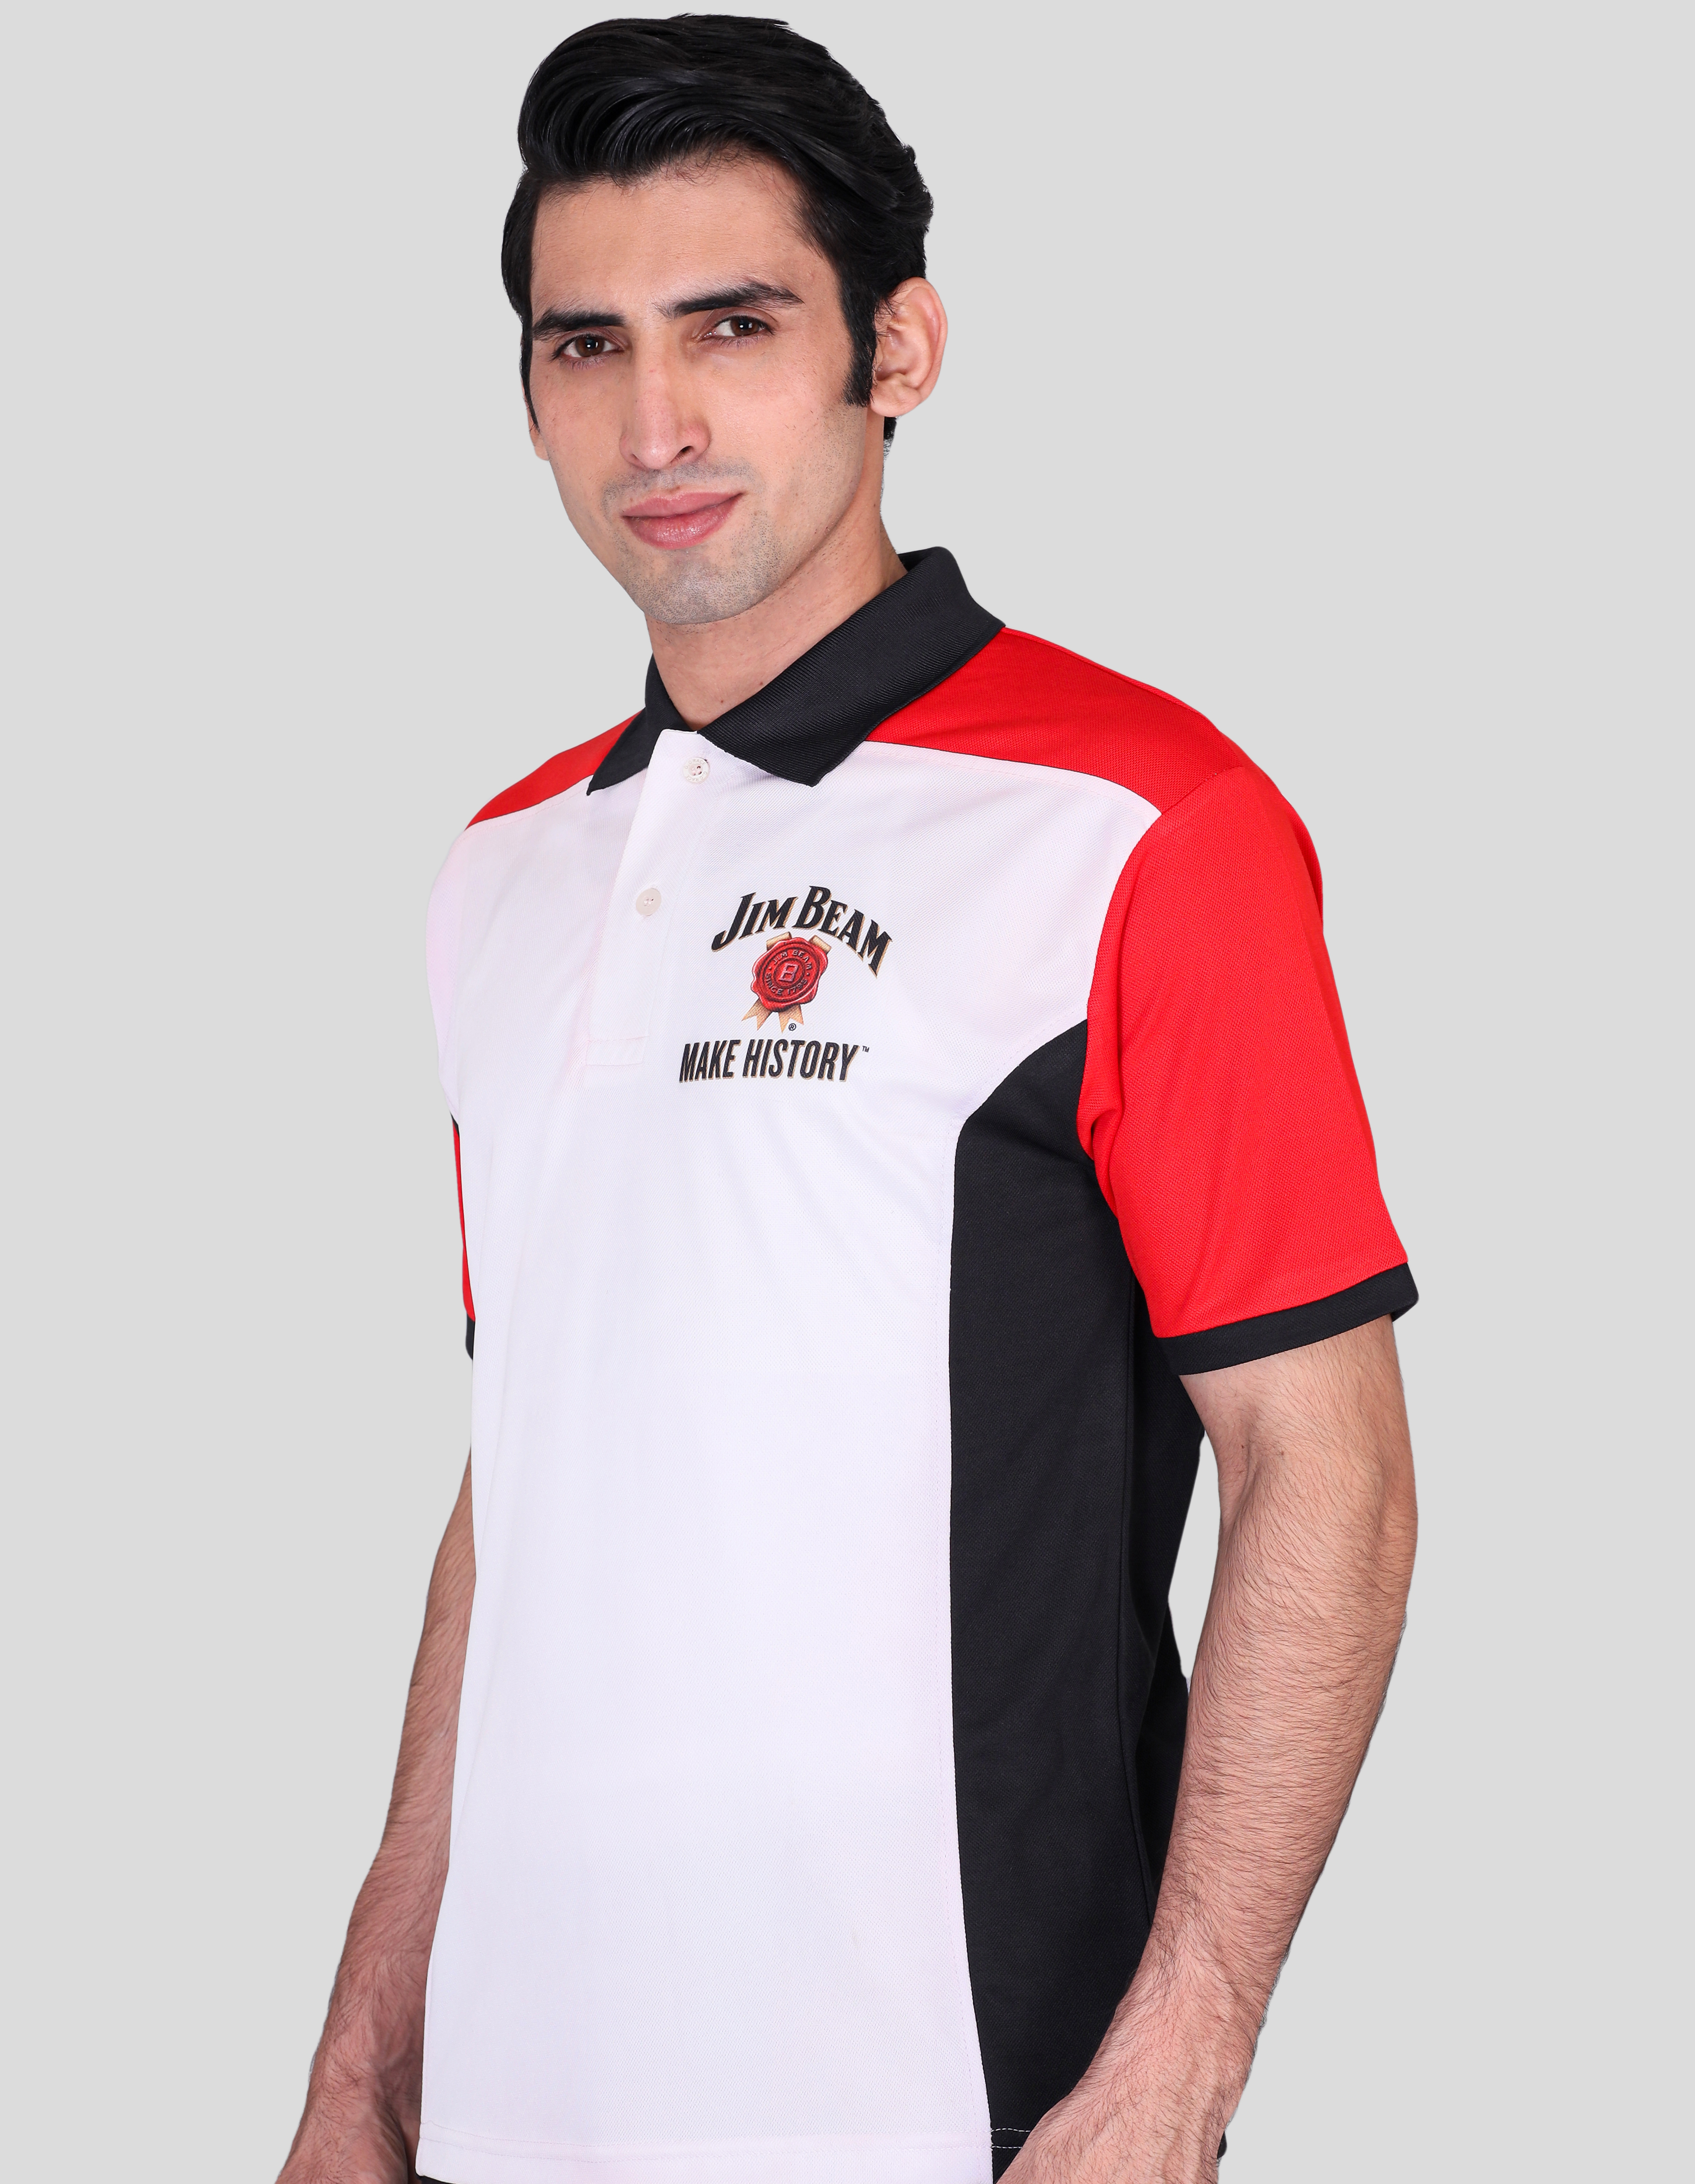 Jim beam white red and black combination dry fits t-shirts with company logo